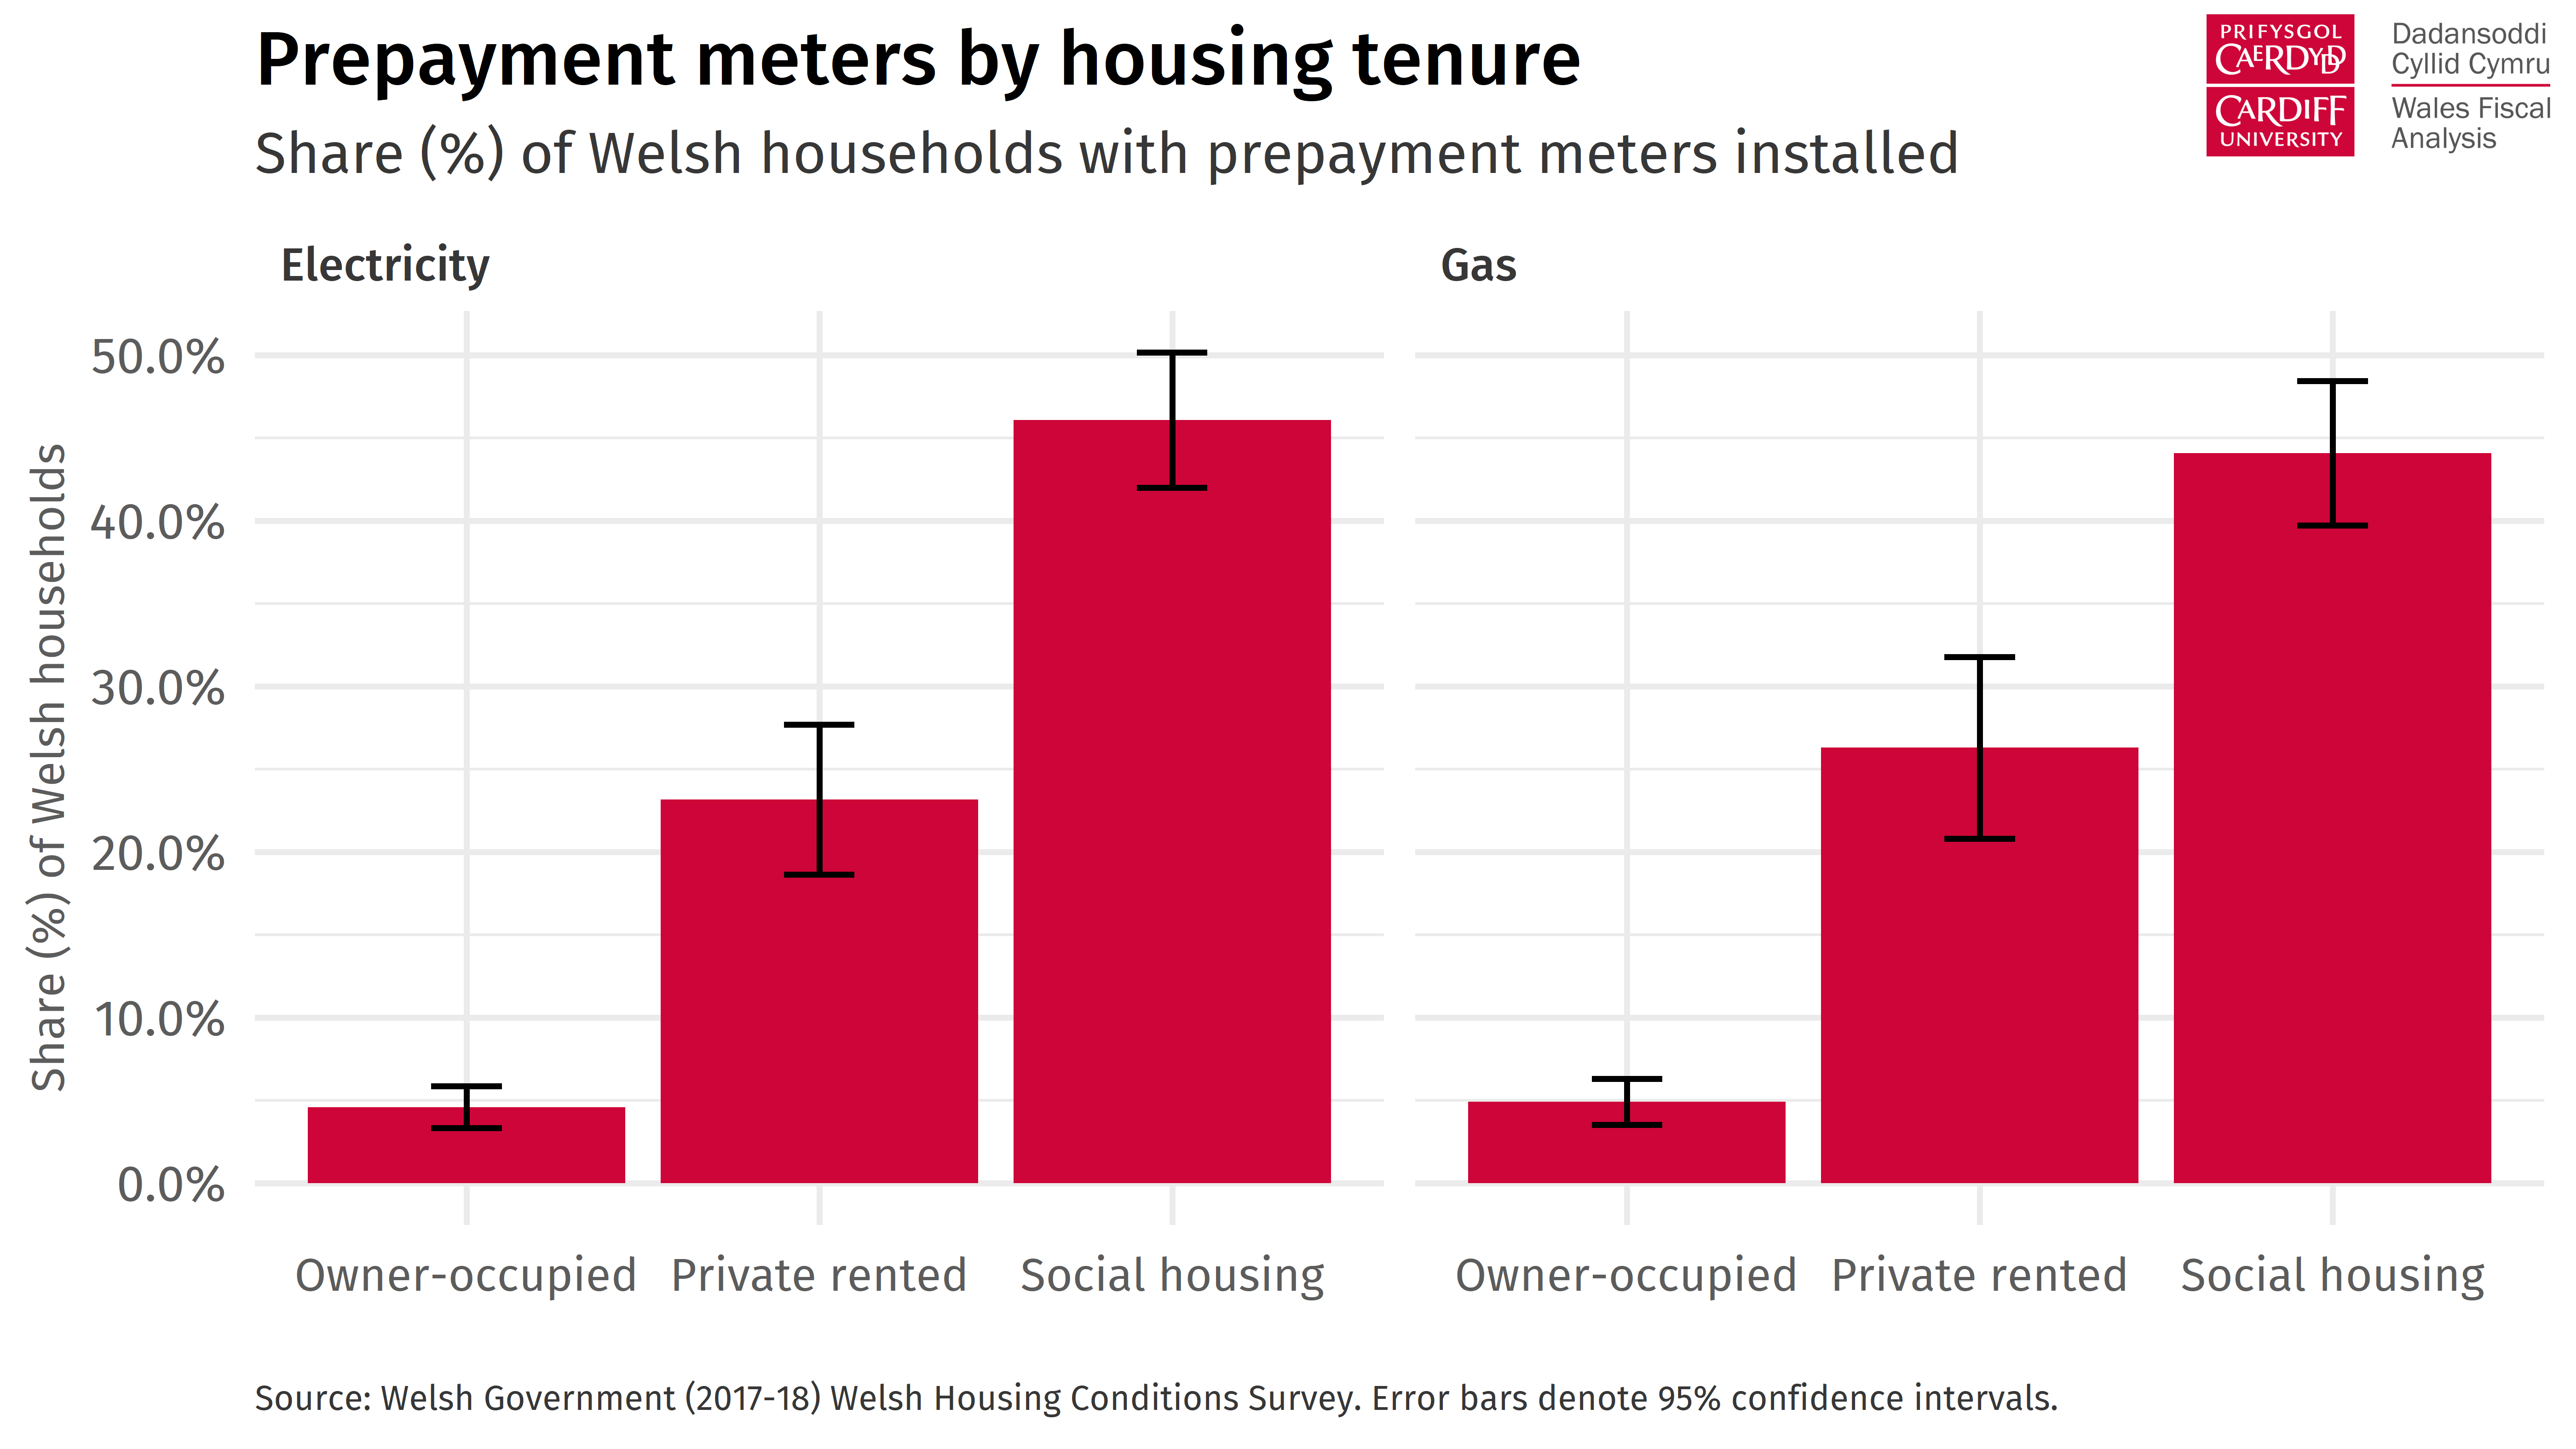 Bar chart showing the proportion of Welsh households with pre-payment meters installed, by housing tenure.